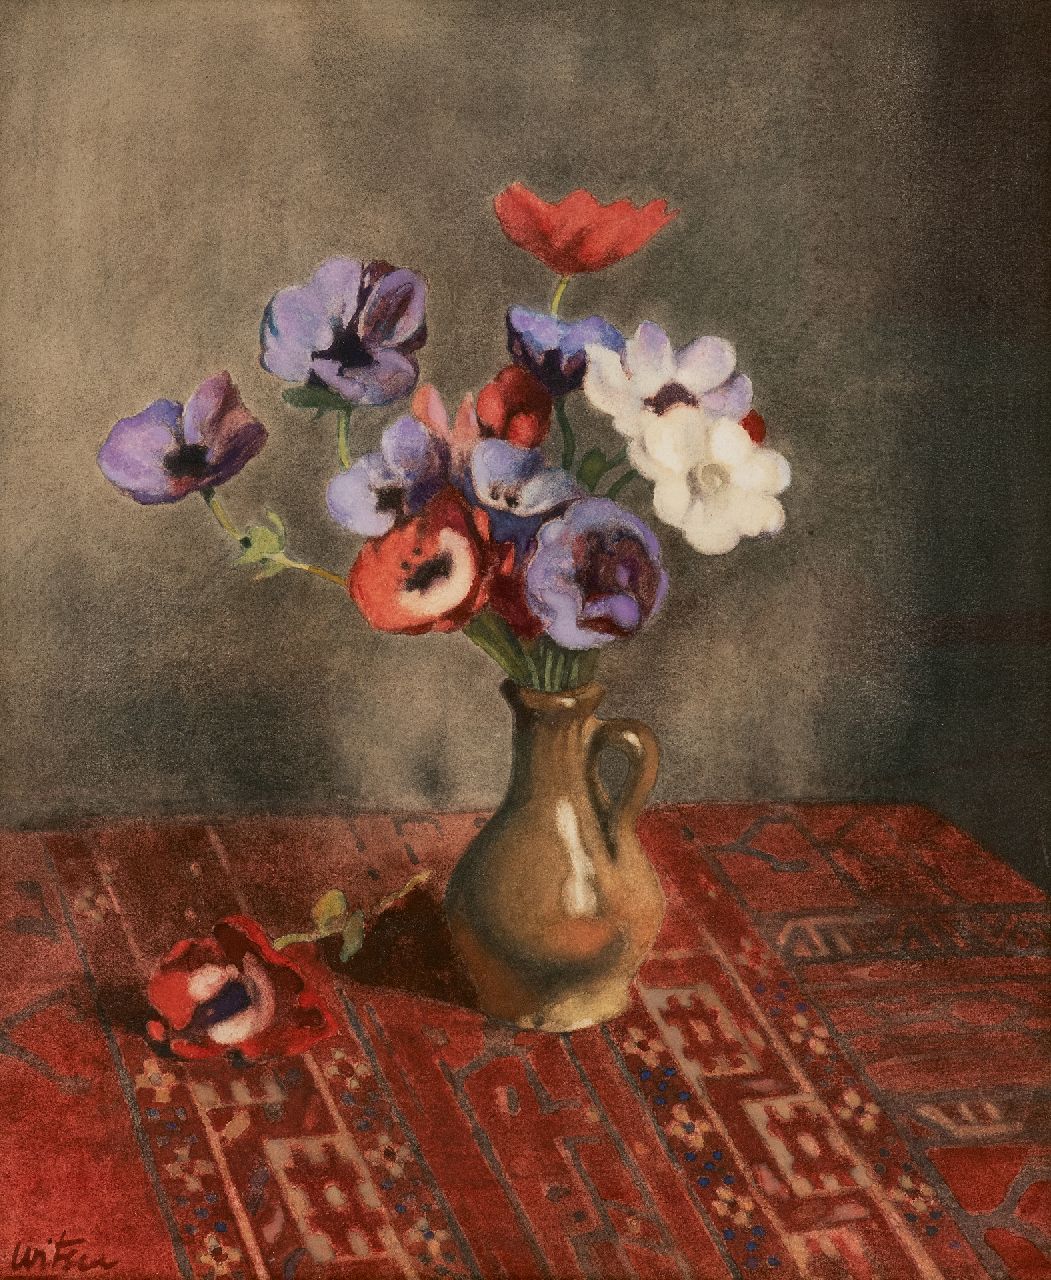 Witsen W.A.  | 'Willem' Arnold Witsen | Watercolours and drawings offered for sale | Anemones in earthenware vase, watercolour on paper 44.5 x 37.0 cm, signed l.l. and painted ca. 1920